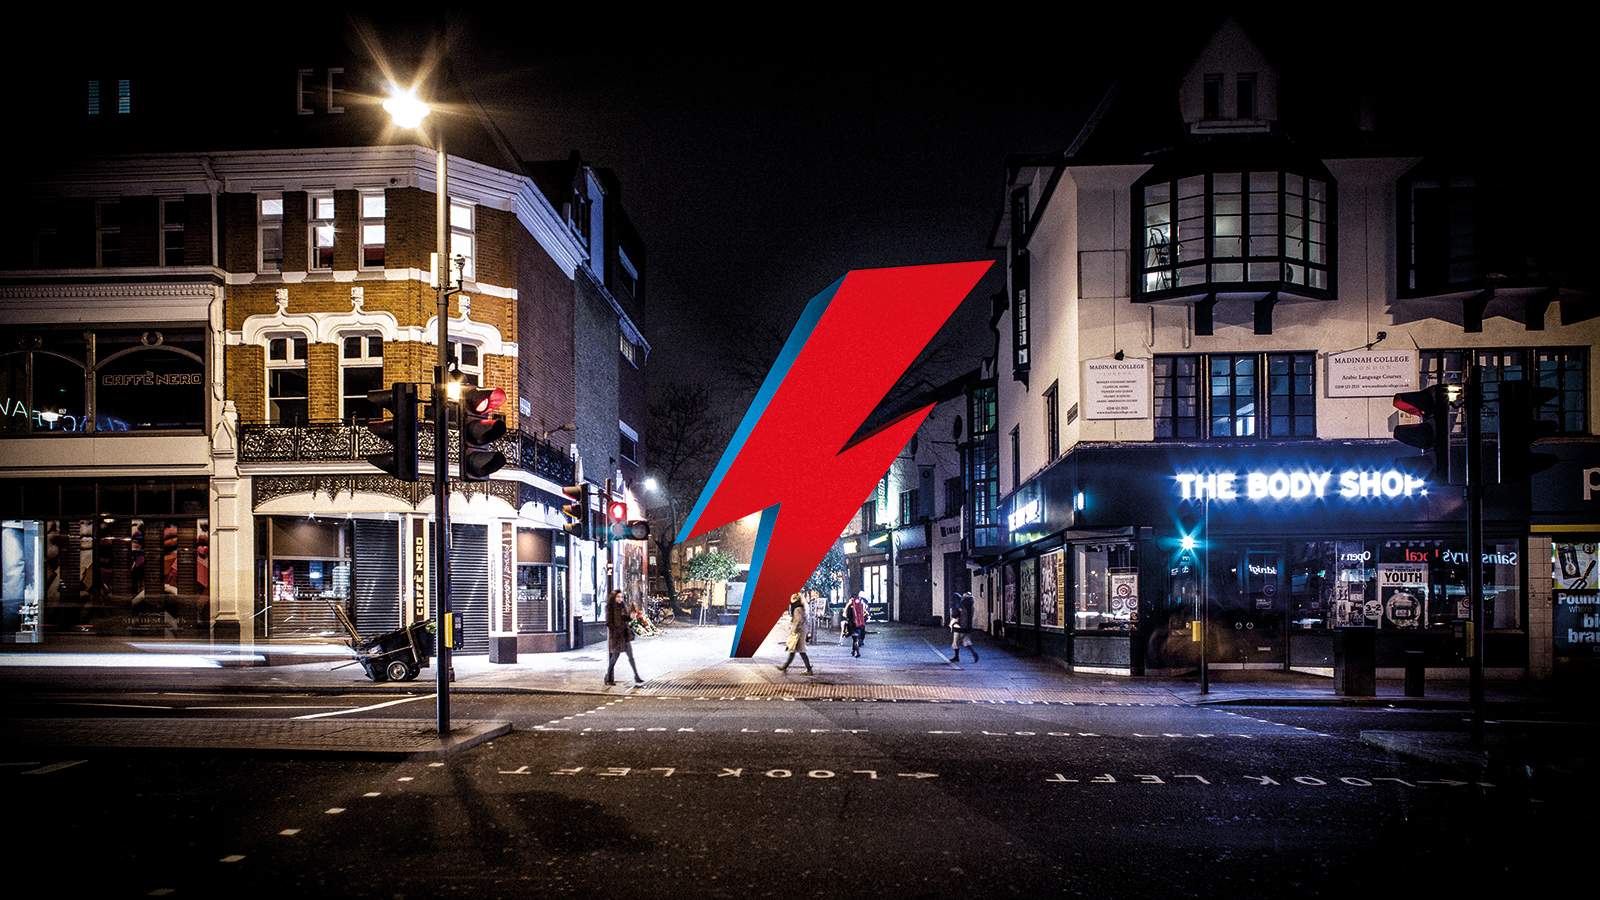 London Could Be Getting a Permanent Public David Bowie Memorial